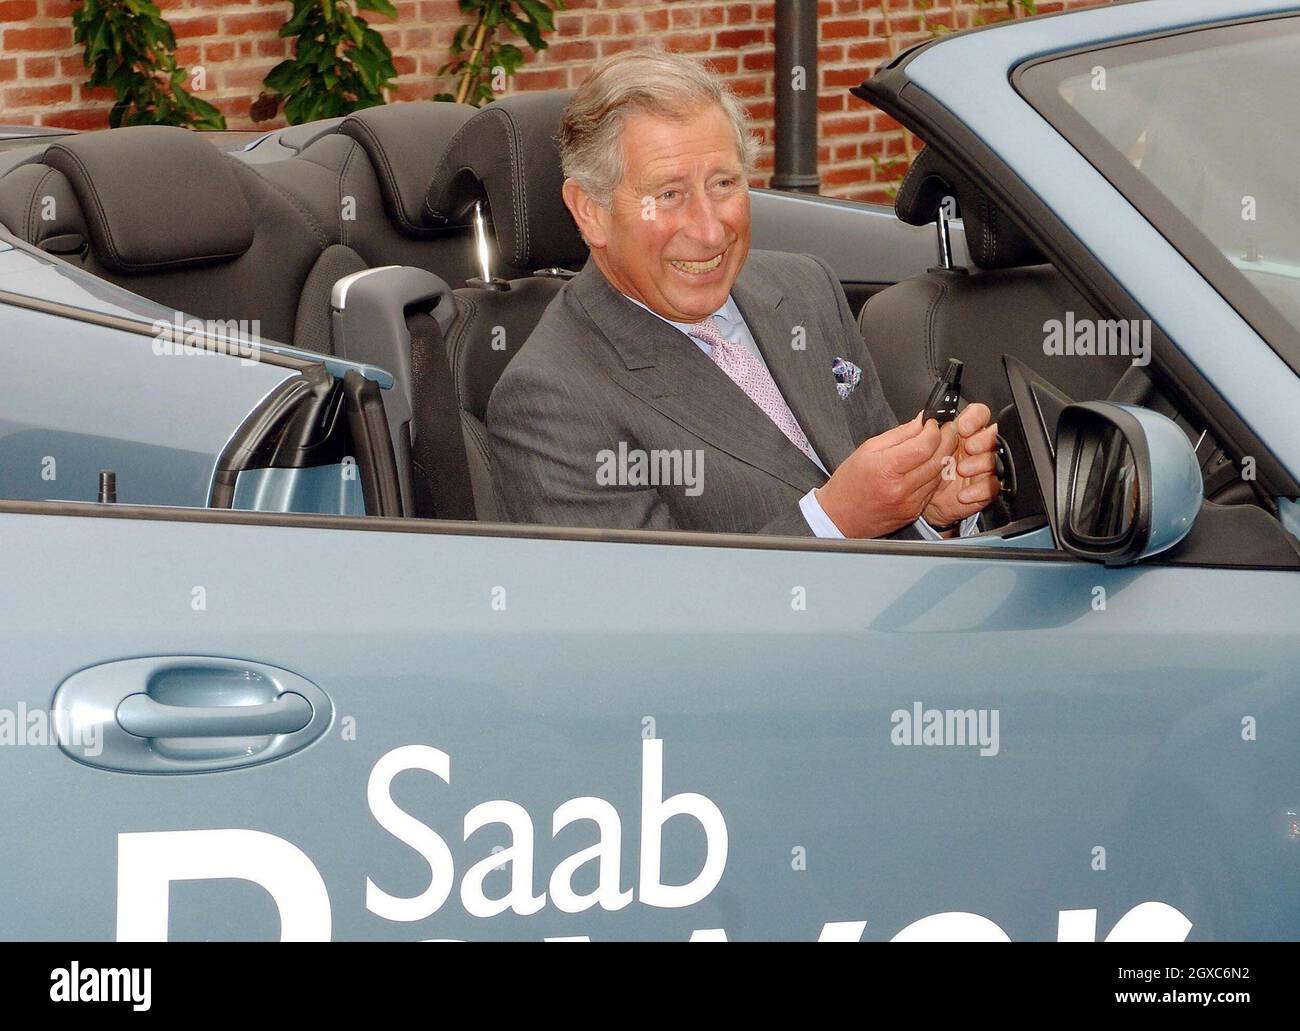 Prince Charles, Prince of Wales tries out a new Saab eco-friendly car during a test drive around the car park of the Hampton Court Palace on June 4, 2007. The Royal test drive took place ahead of the Brighton to London Eco-Car Rally tomorrow. Stock Photo